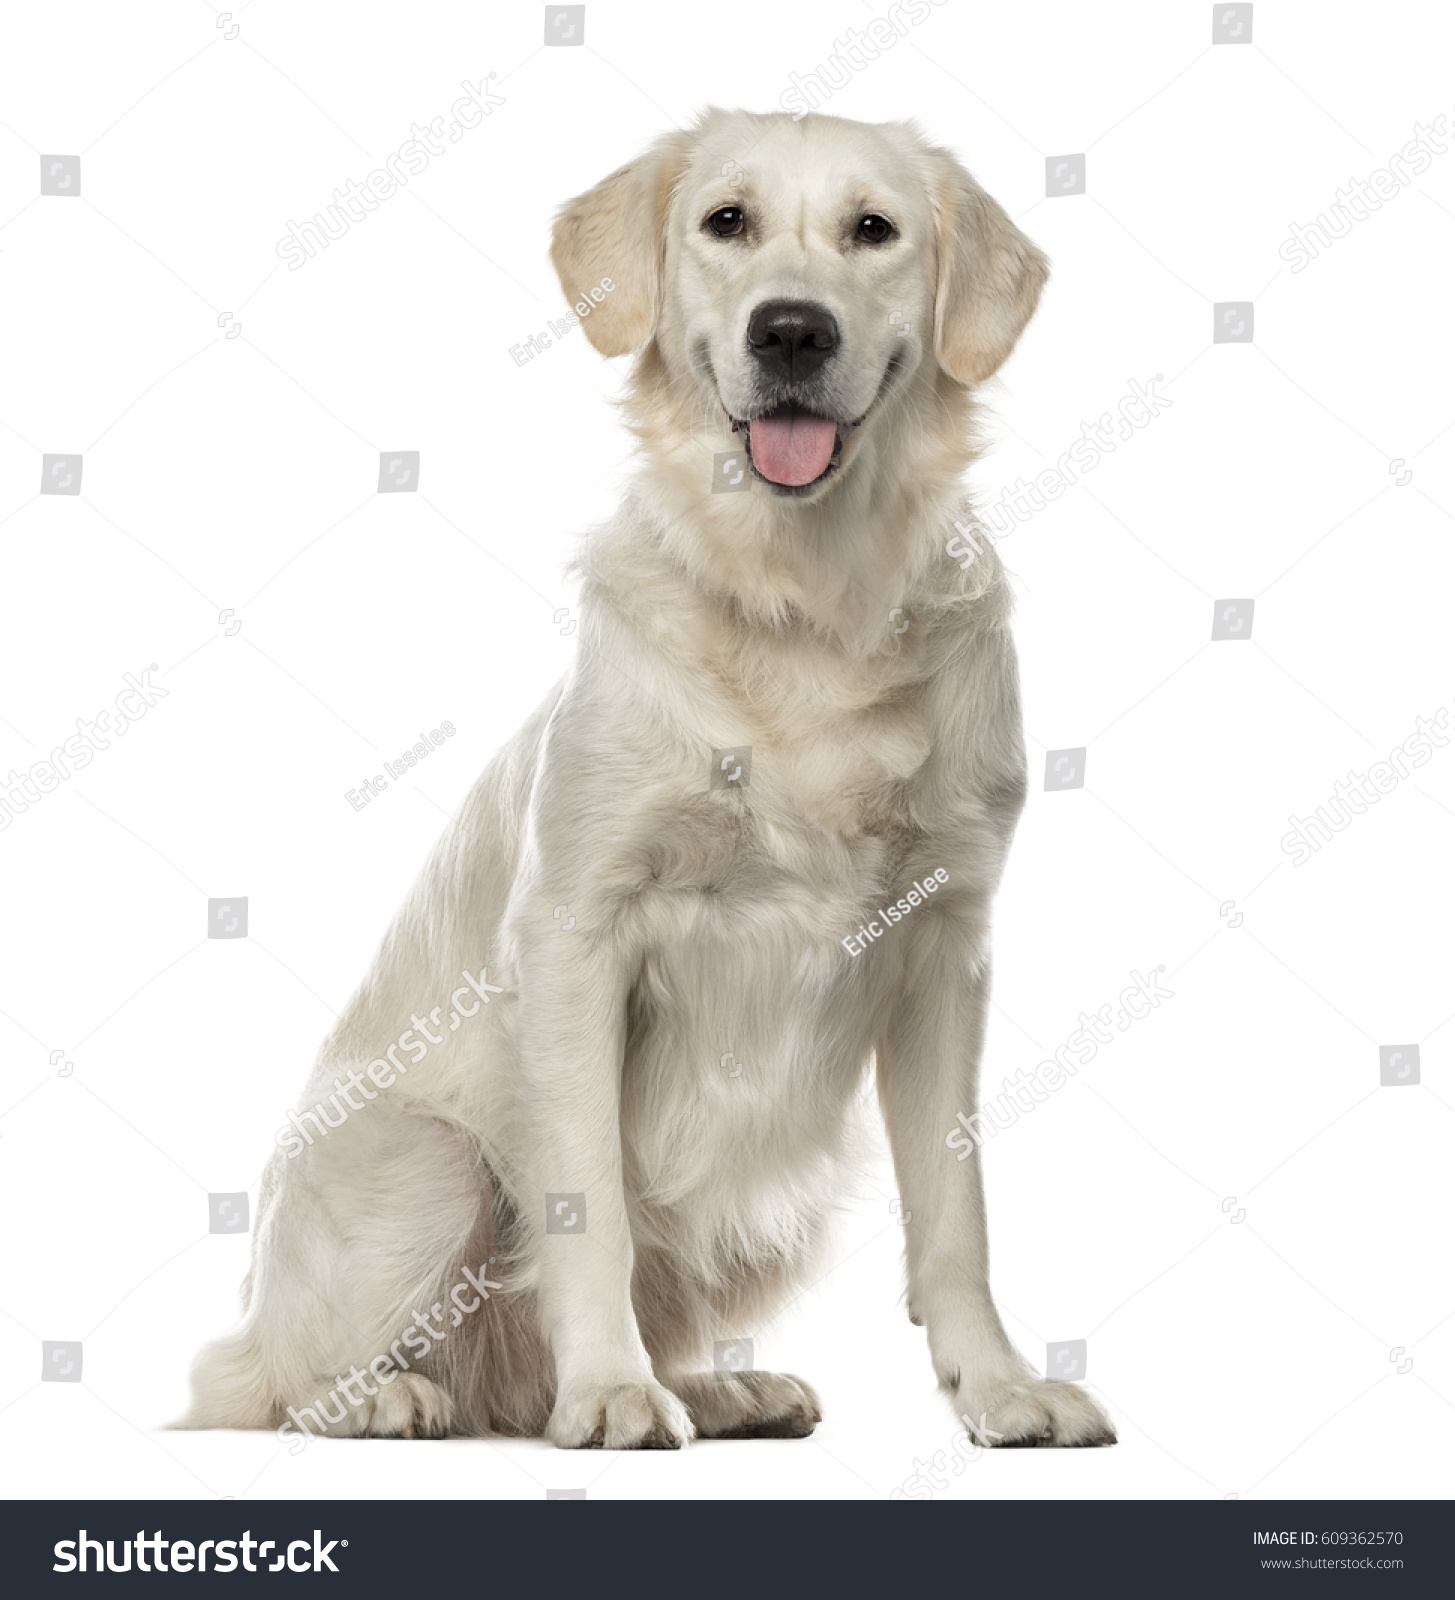 White Golden Retriever sitting, 19 months old , isolated on white #609362570